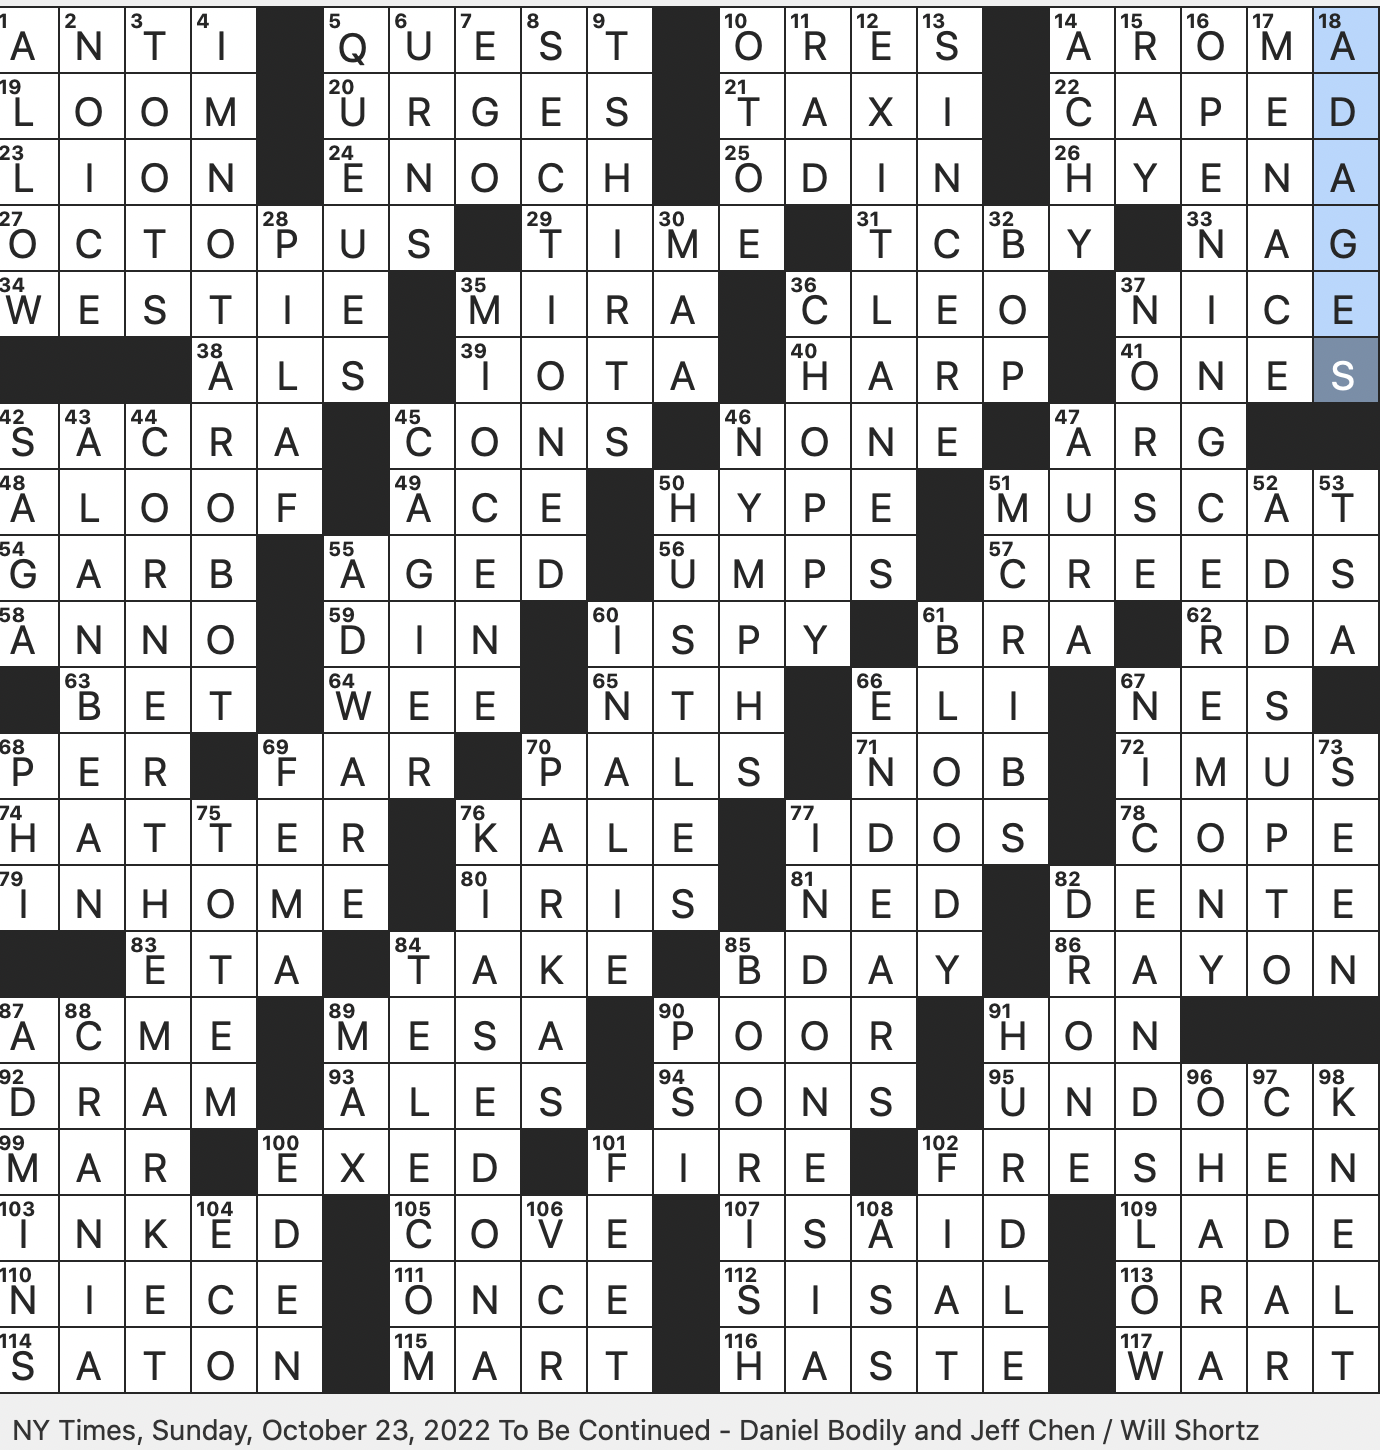 Rex Parker Does the NYT Crossword Puzzle: Fatherly tips to use a